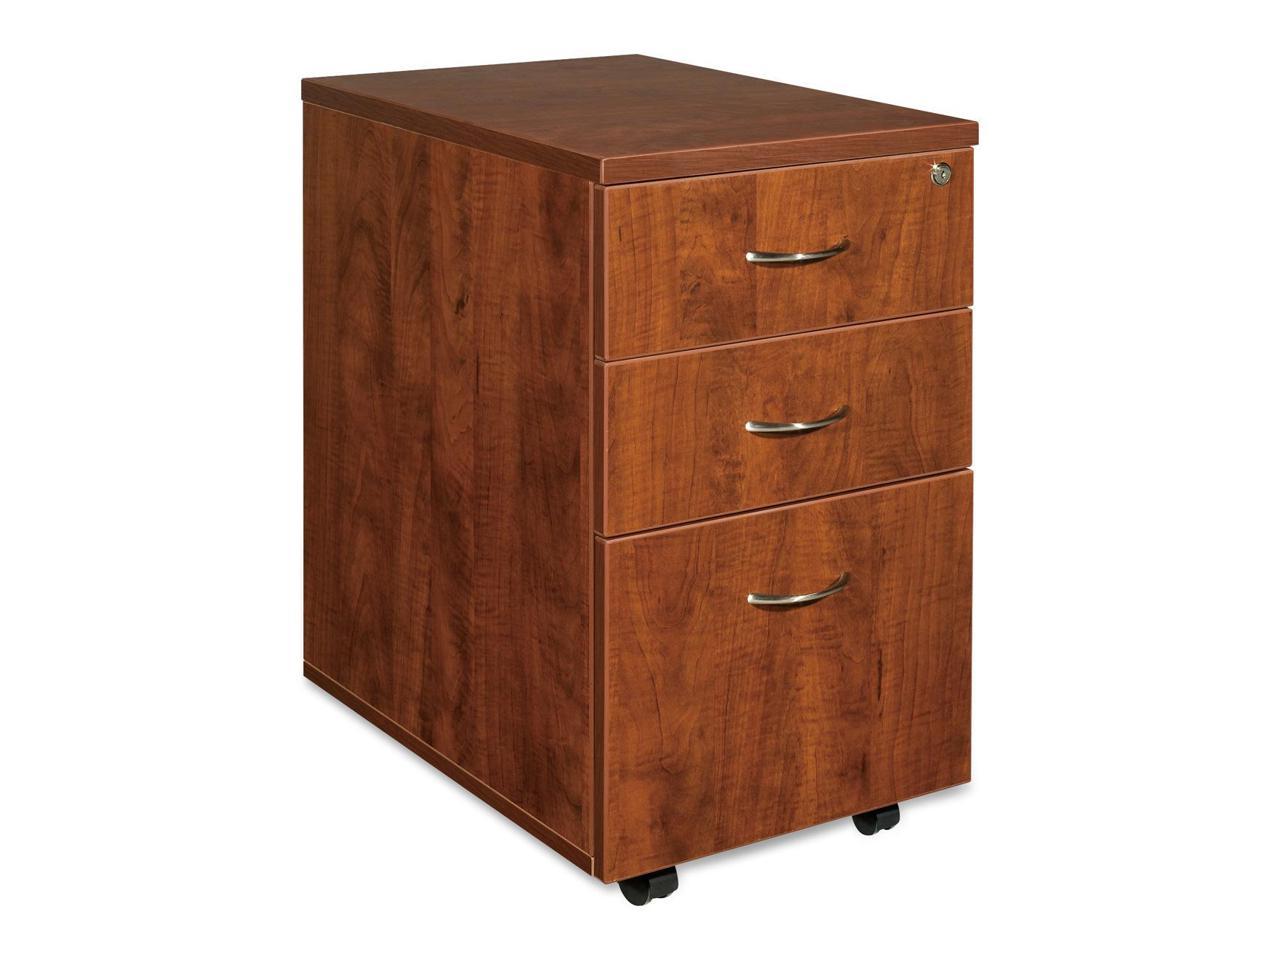 3 Drawers Vertical Wood Composite Lockable Filing Cabinet, Cherry - image 1 of 10